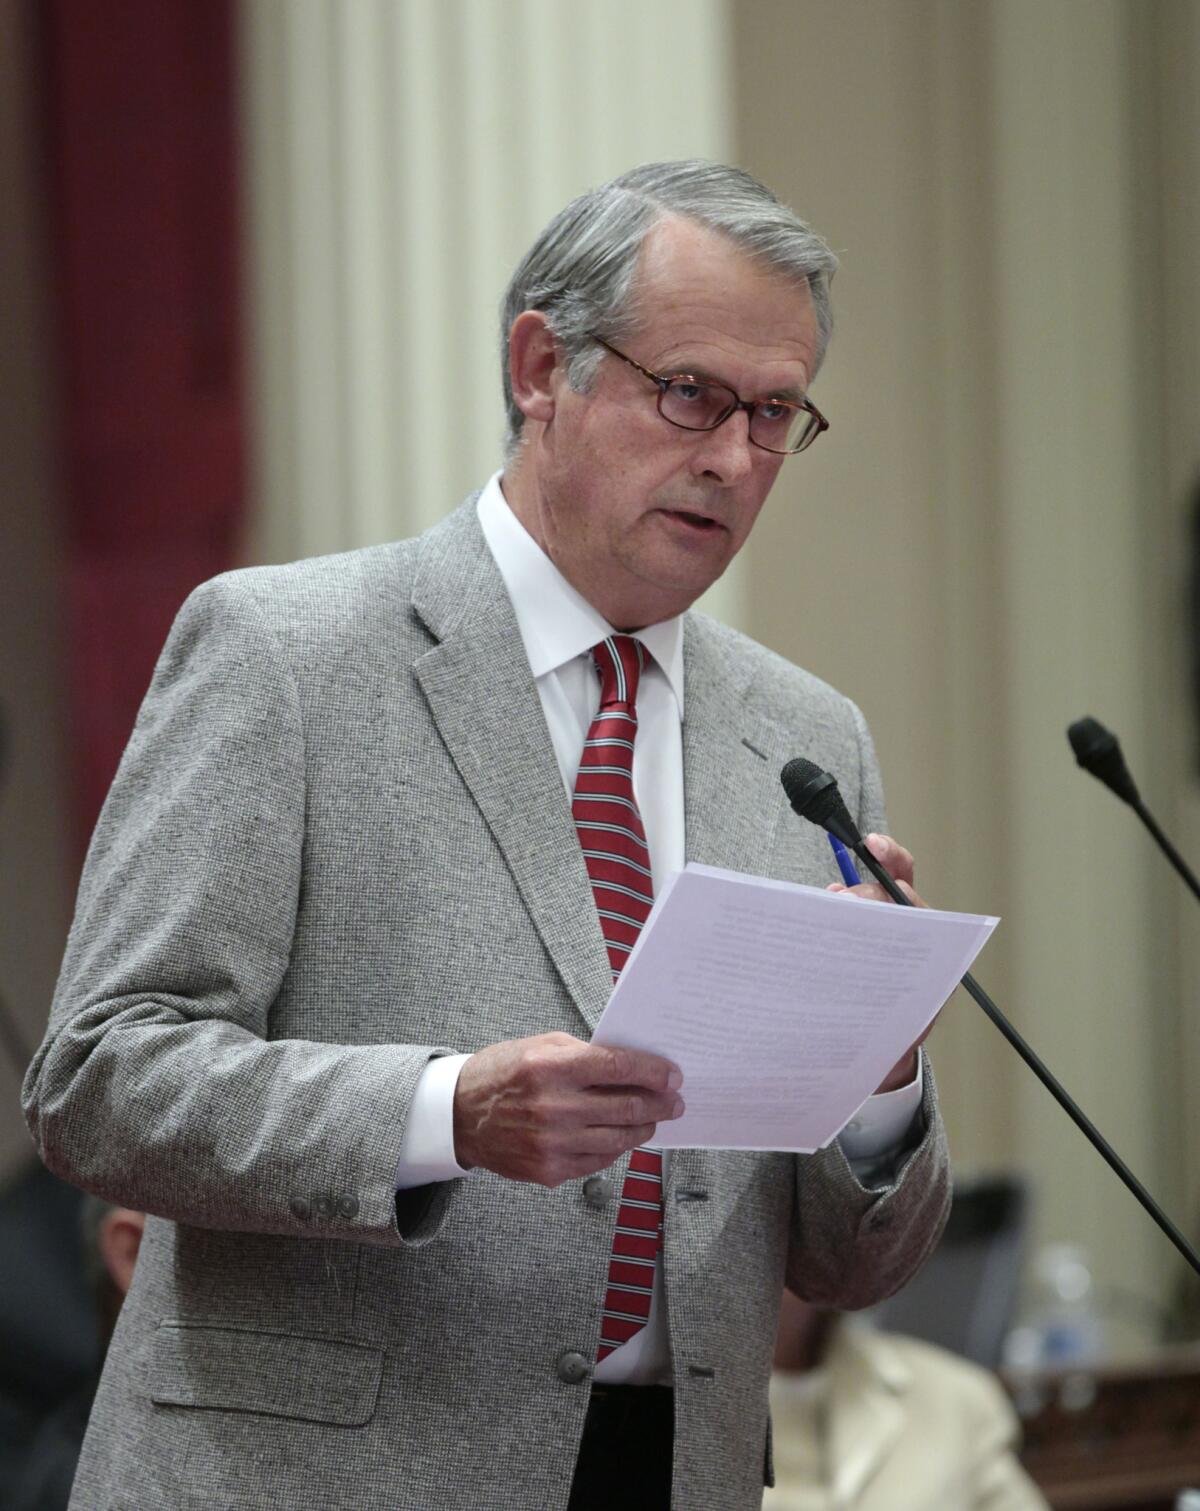 State Sen. Bill Emmerson (R-Redlands) discusses the state budget at the Capitol in Sacramento. Emerson announced on Friday that he was resigning his Senate seat effective Dec. 1.